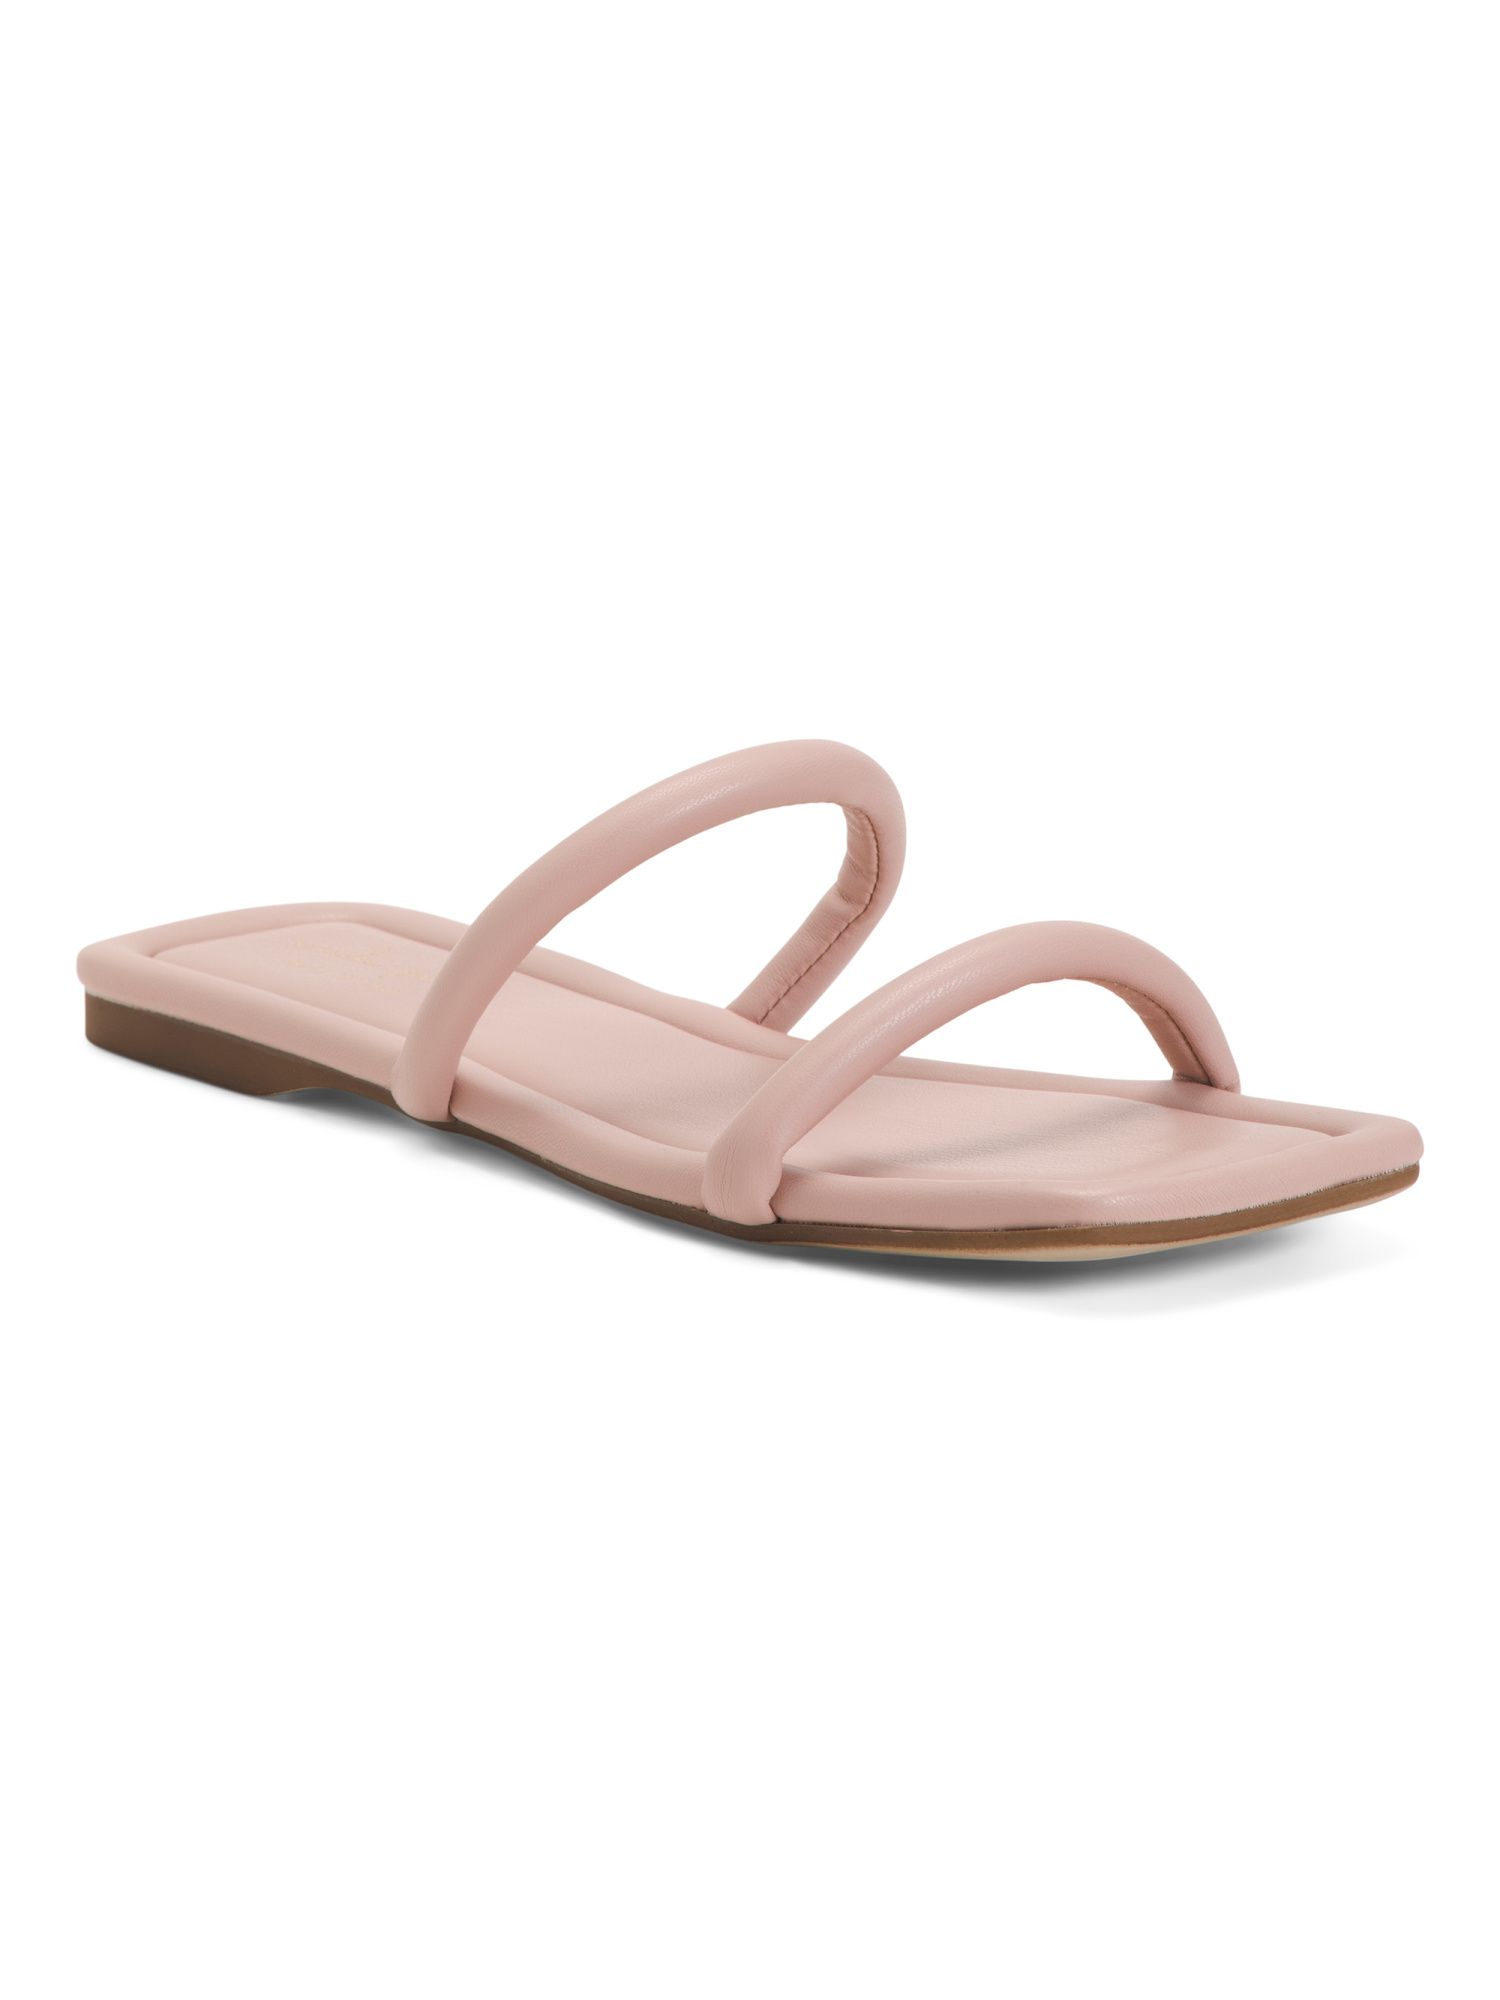 Made In Italy Two Bands Open Toe Sandals | TJ Maxx